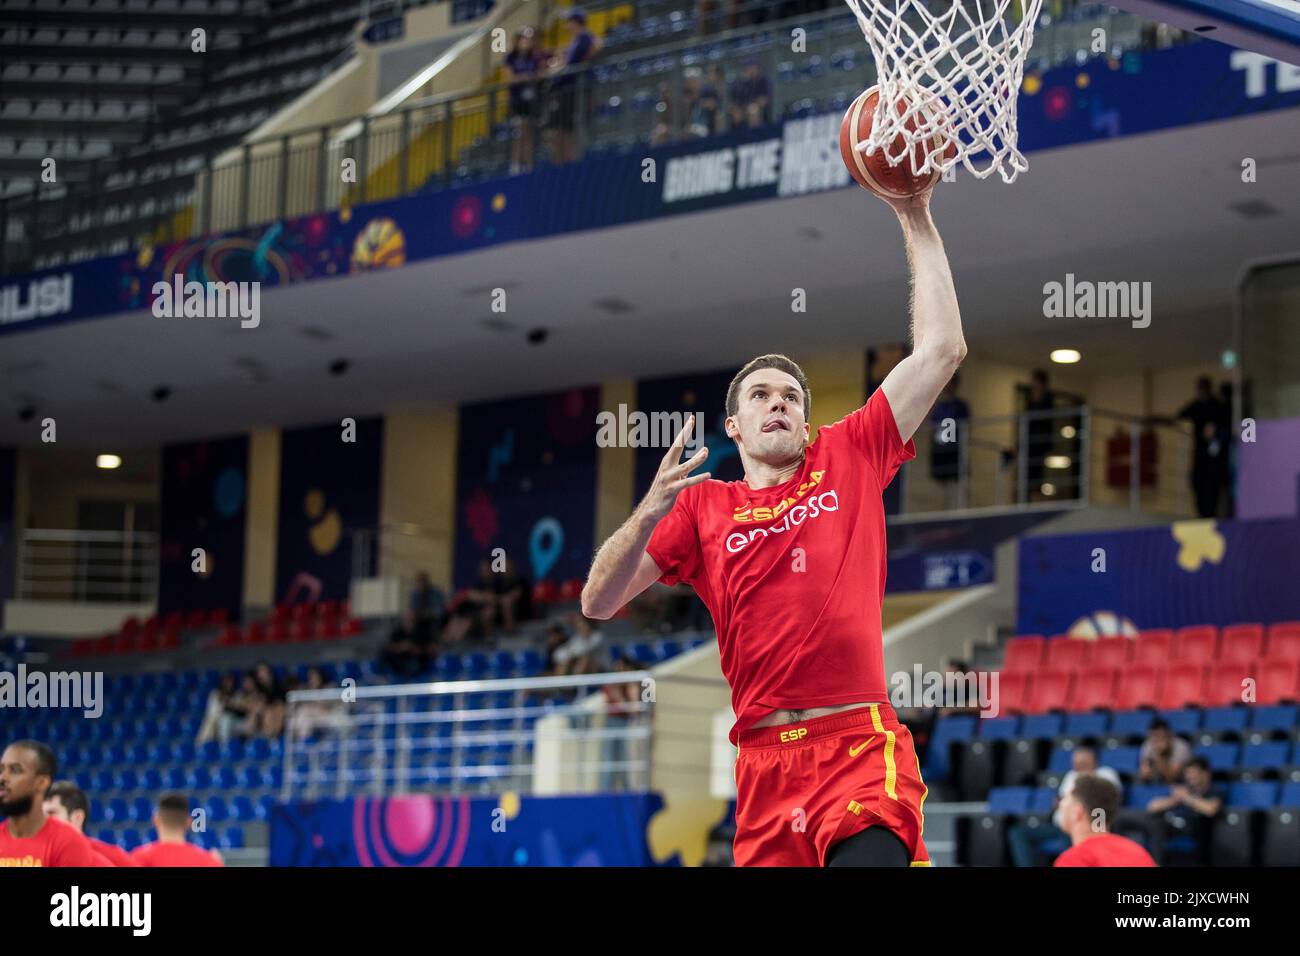 Tbilisi, Georgia, 6th September 2022. Xabi Lopez-Arostegui of Spain warms up during the FIBA EuroBasket 2022 group A match between Montenegro and Spain at Tbilisi Arena in Tbilisi, Georgia. September 6, 2022. Credit: Nikola Krstic/Alamy Stock Photo